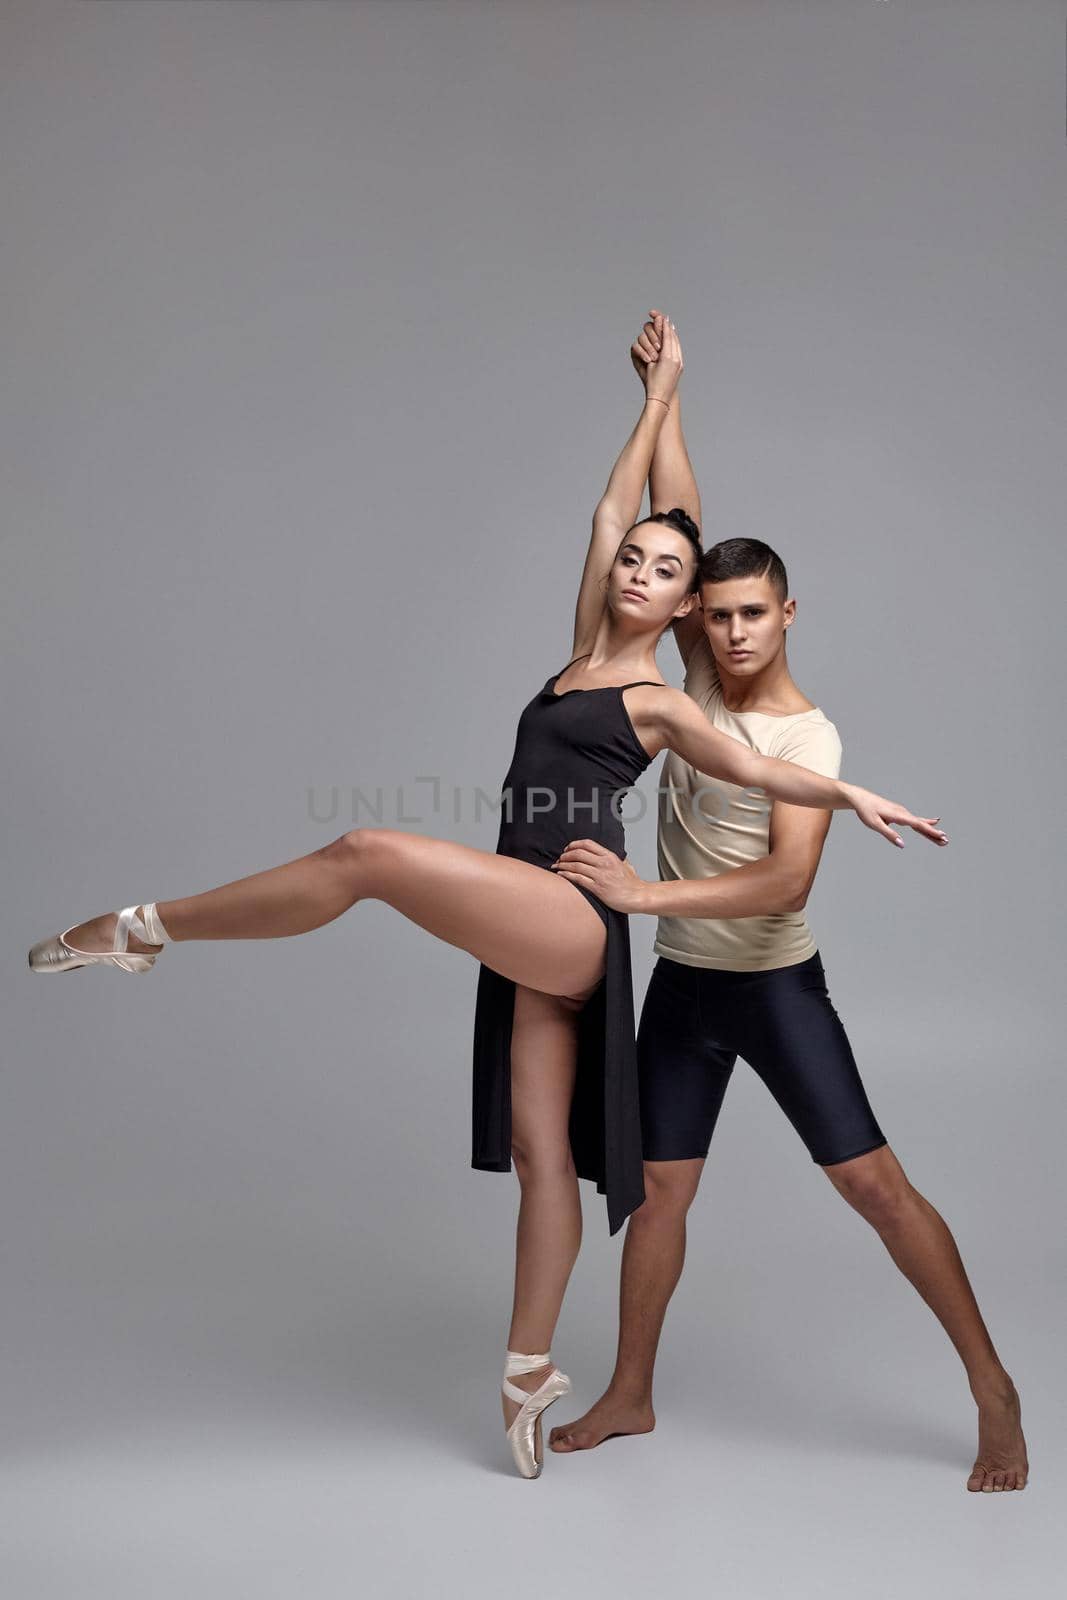 Pair of a modern ballet dancers are posing over a gray studio background and looking at the camera. Handsome man in black shorts with beige t-shirt and attractive woman in a black dress and white pointe shoes are dancing together. Ballet and contemporary choreography concept. Art photo.